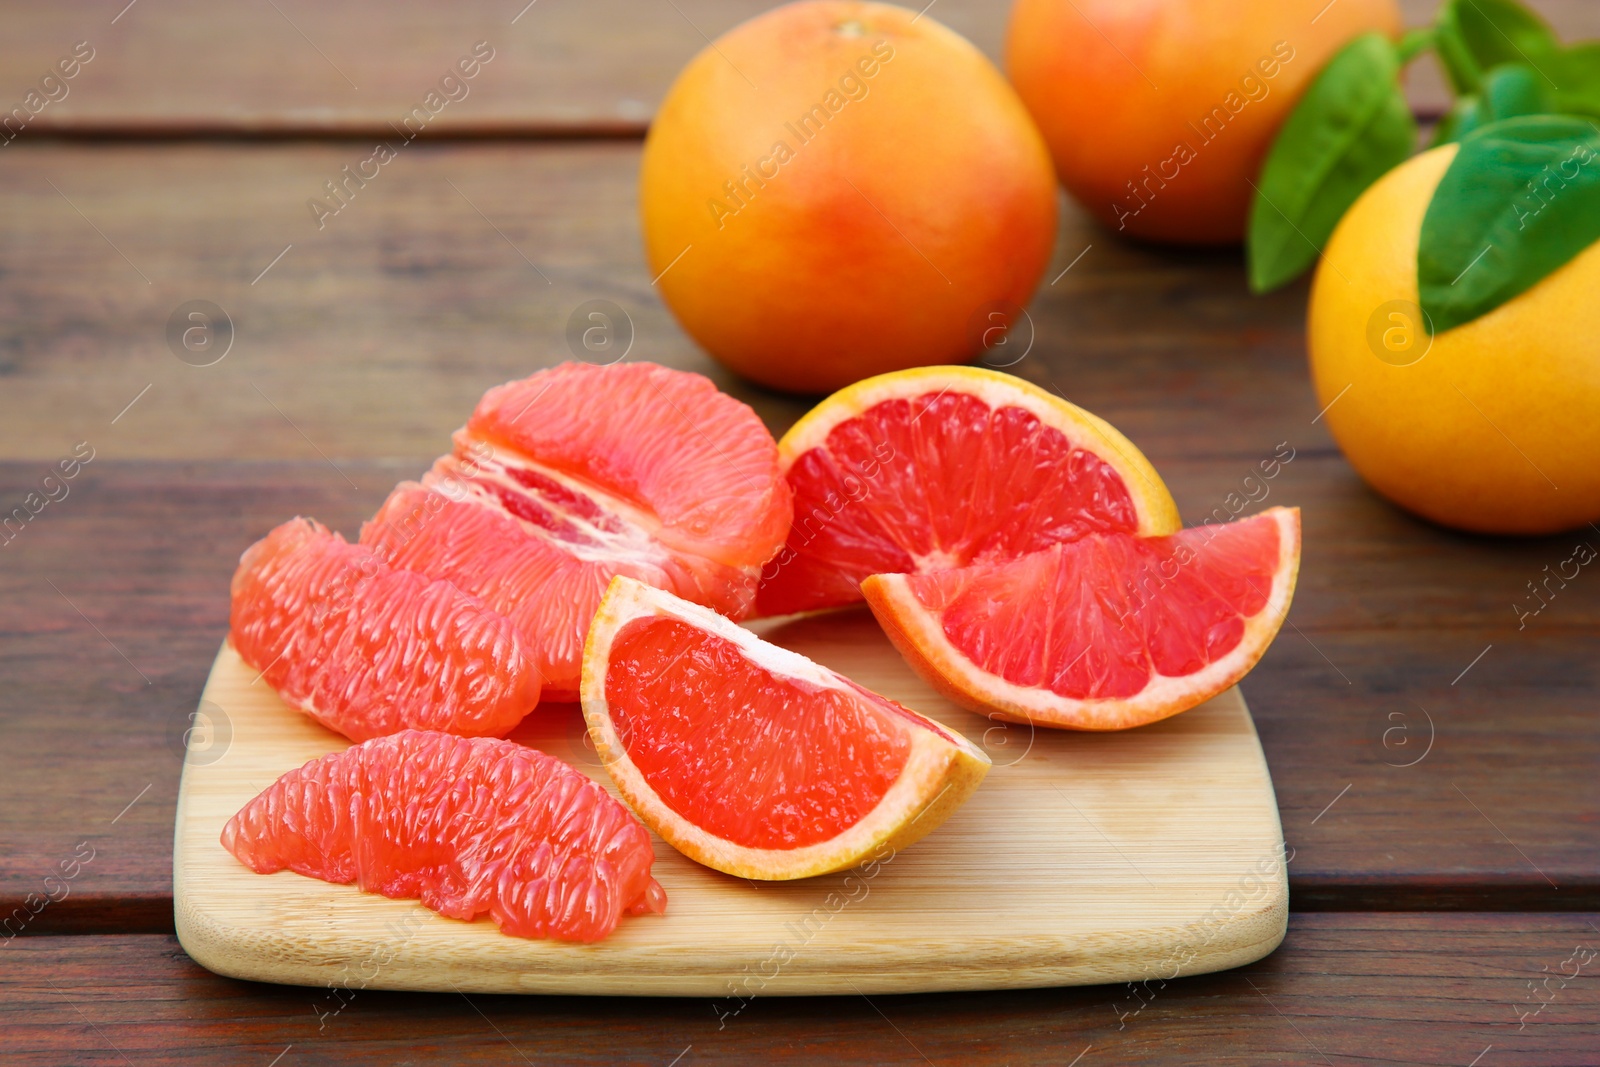 Photo of Cut and whole fresh ripe grapefruits on wooden table